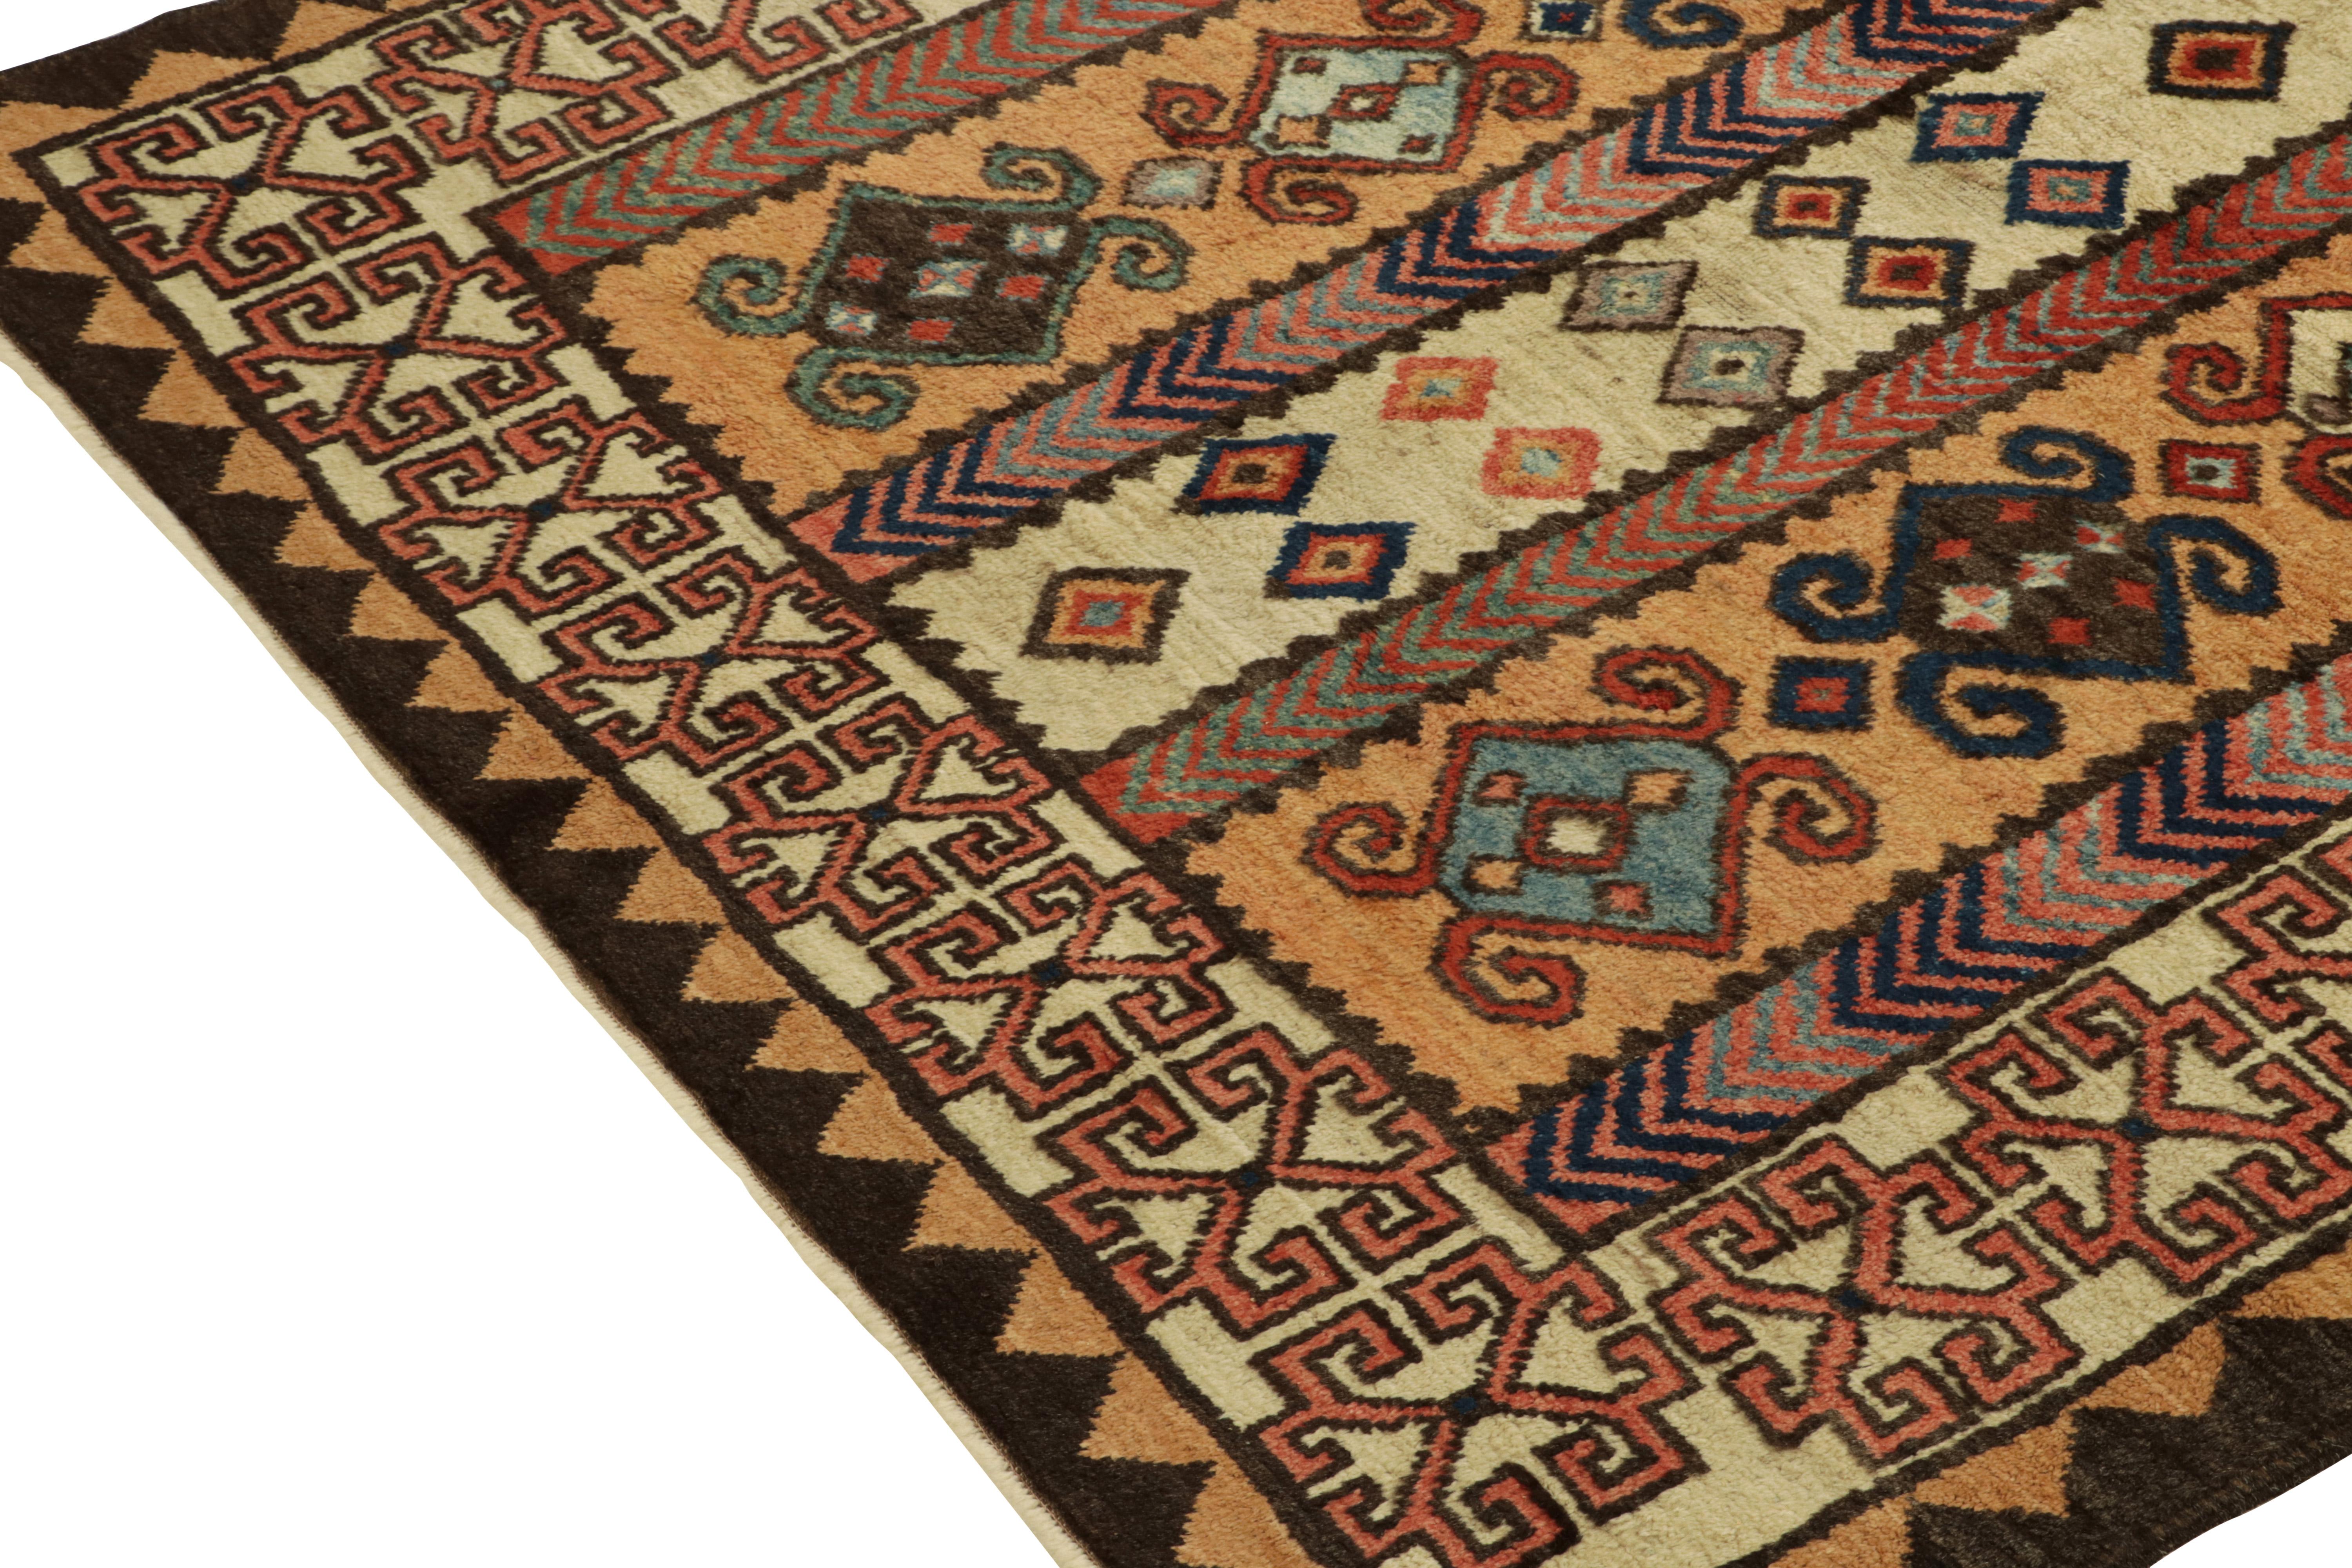 1950s Vintage Tribal Rug in Beige-Brown, Blue Geometric Pattern by Rug & Kilim In Good Condition For Sale In Long Island City, NY